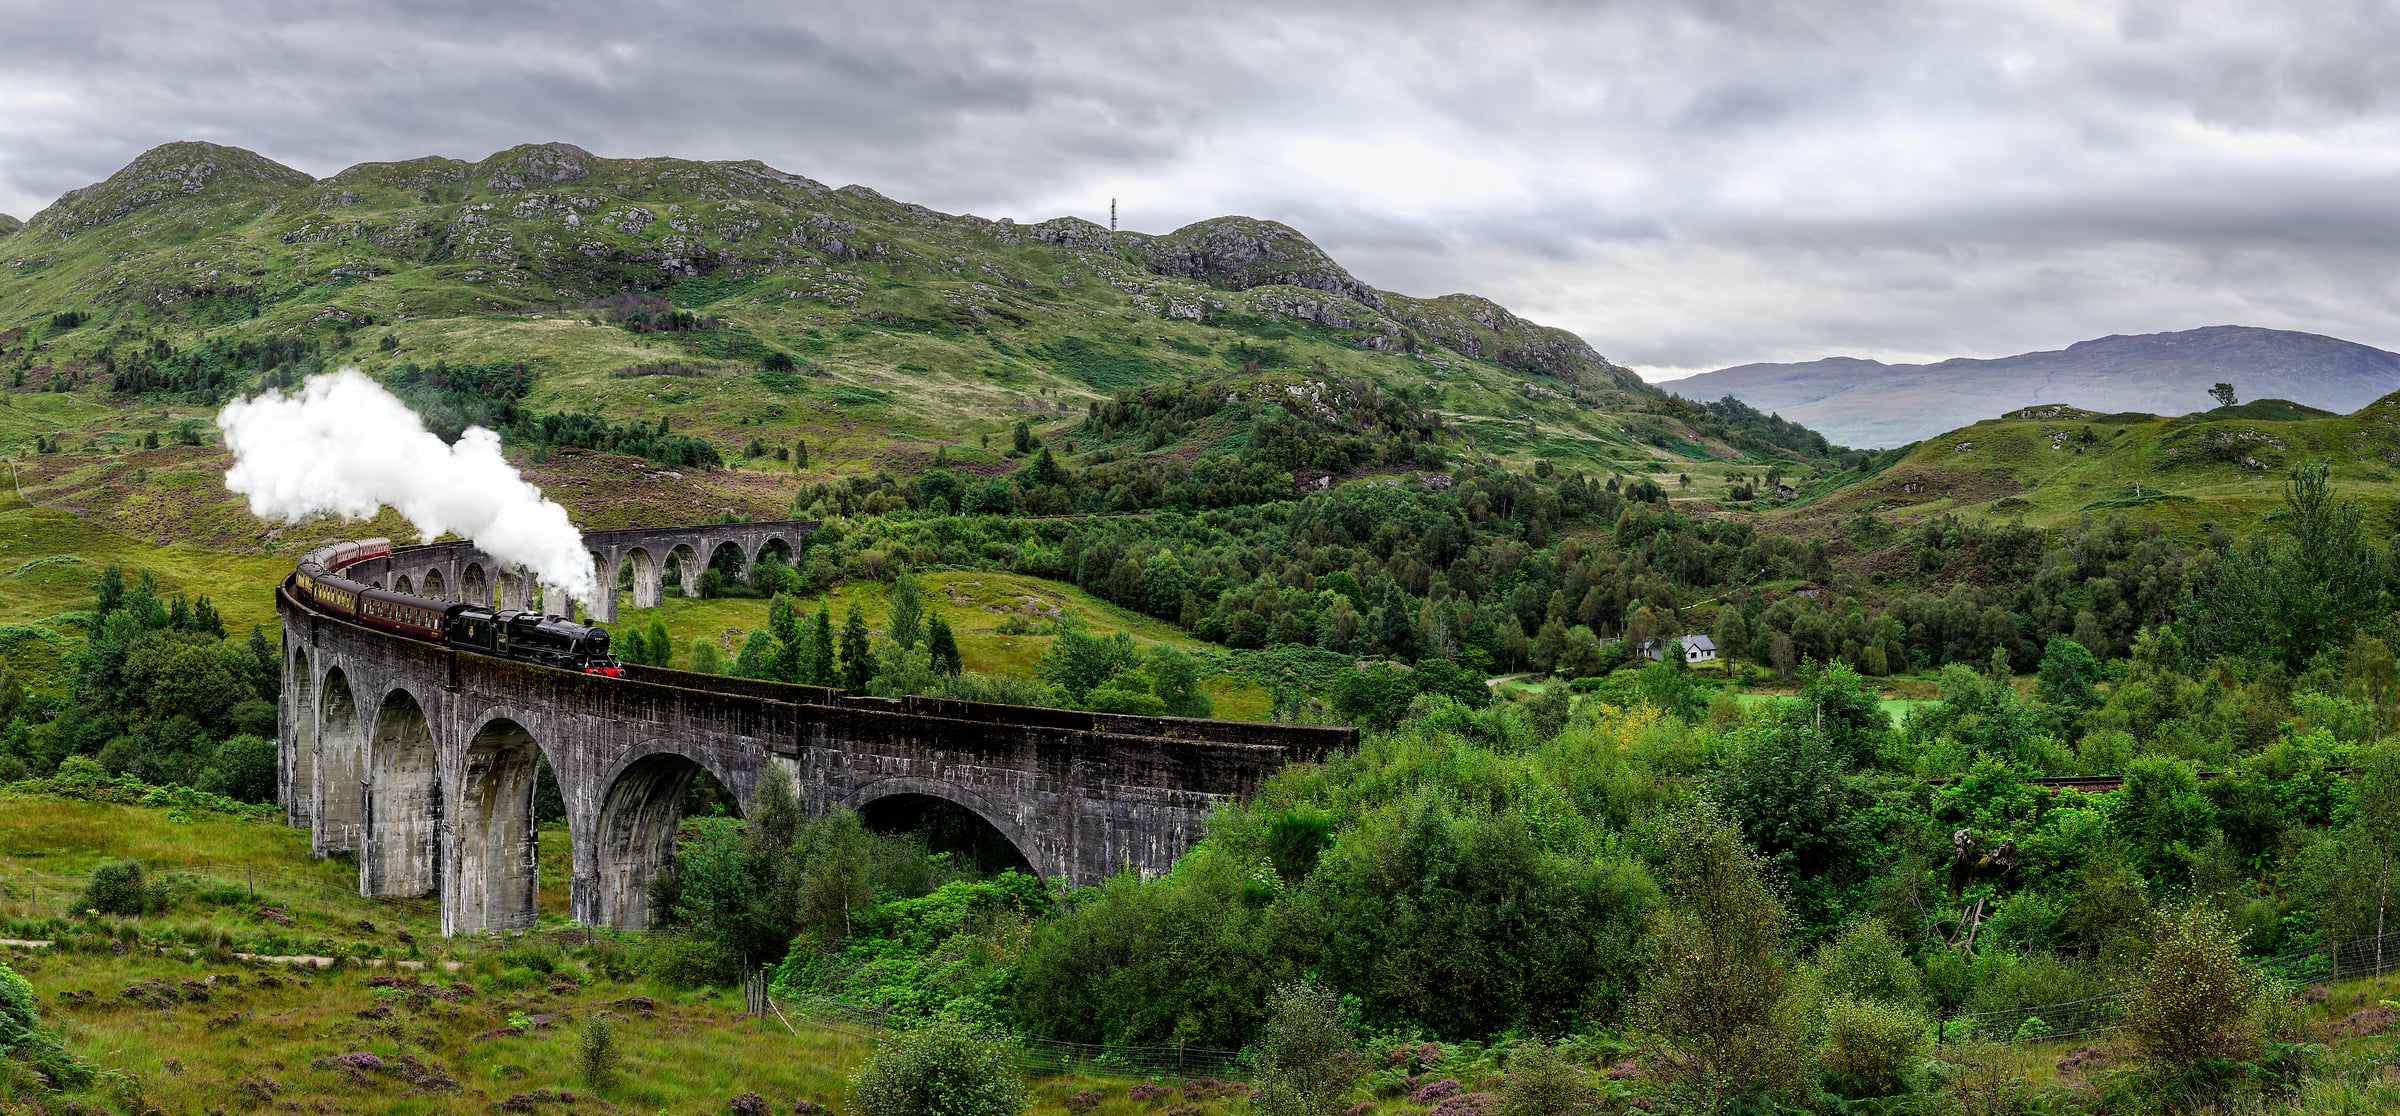 1,531 megapixels! A very high resolution, large-format VAST photo print of the Jacobite railroad train steam locomotive going across the Glenfinnan Viaduct bridge; photograph created by Scott Dimond in Glenfinnan Viaduct, United Kingdom